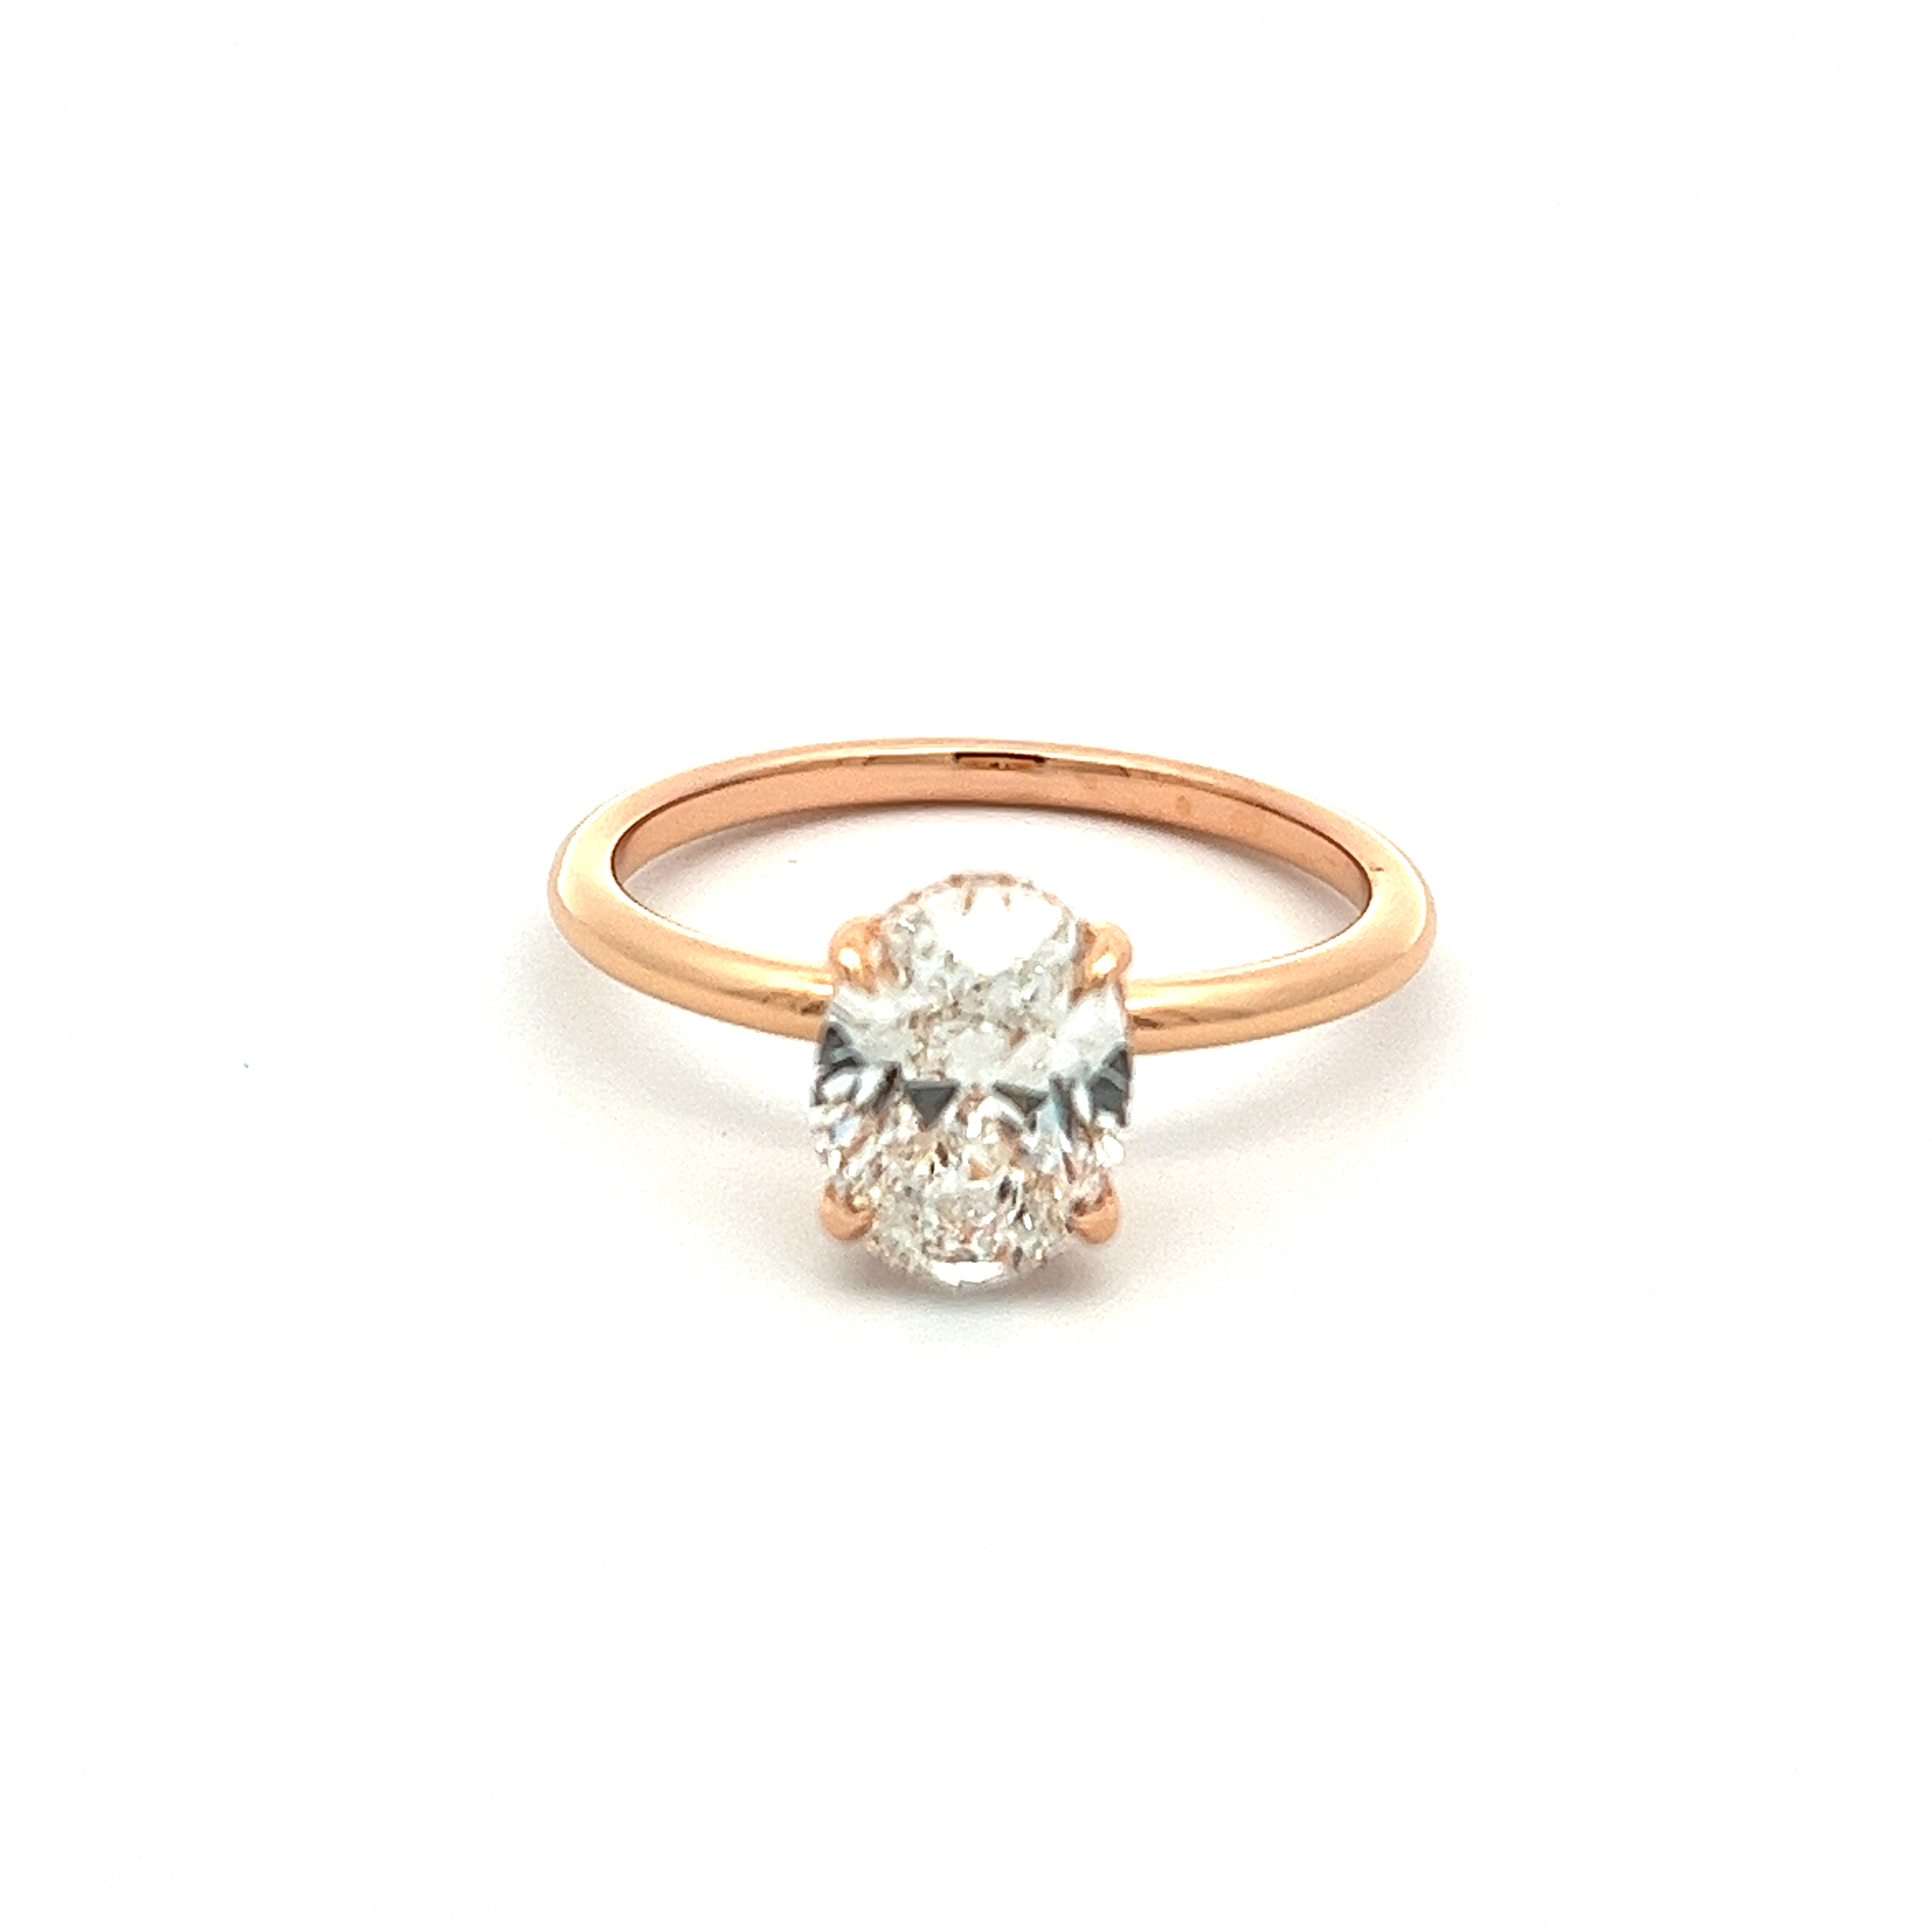 An 18k Rose Gold Oval Diamond Engagement Ring